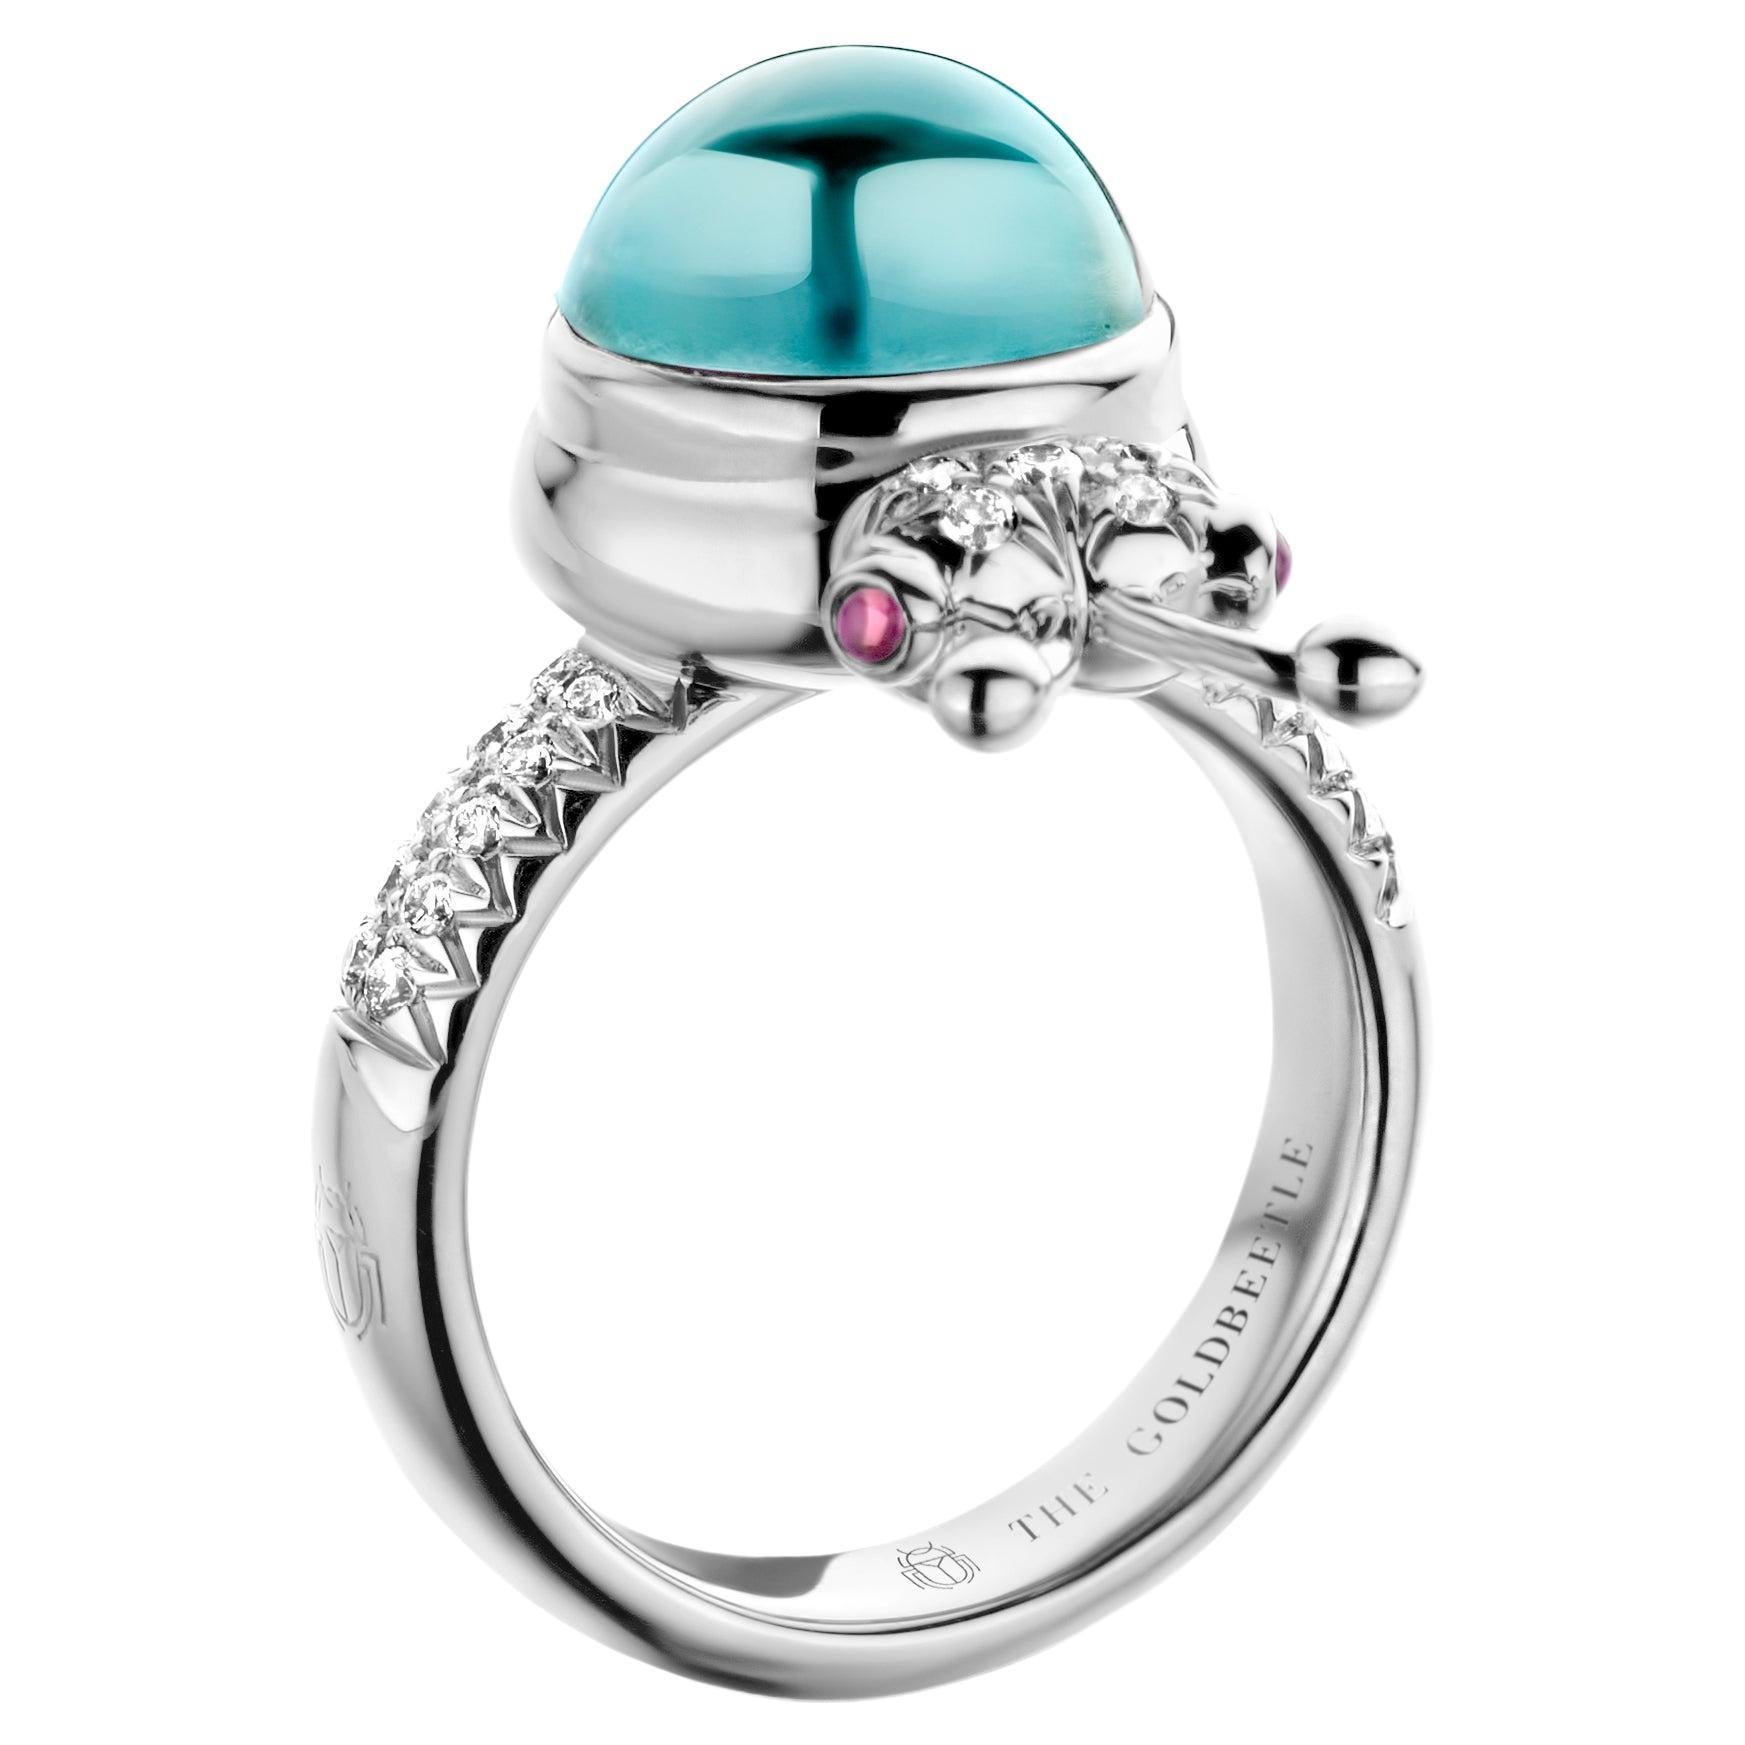 One-of-a-kind lucky beetle ring in 18-Karat white gold 10g set with the finest natural diamonds in brilliant cut 0,23 Carat (VVS/DEF quality) one natural, Aquamarine in round cabochon cut 6,00 Carat and two pink tourmalines in round cabochon cut.